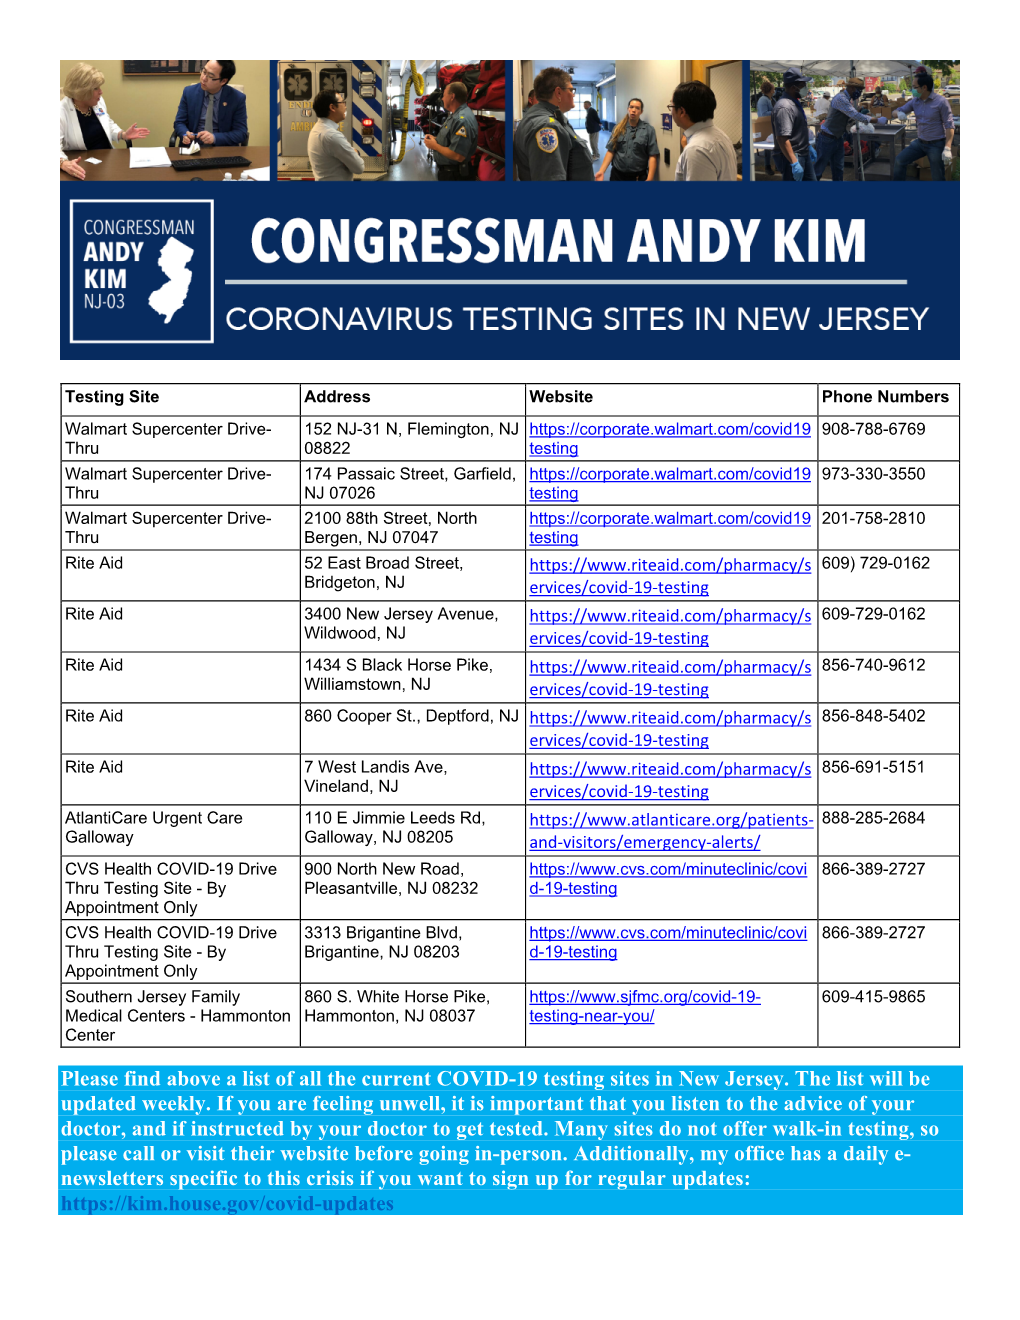 Please Find Above a List of All the Current COVID-19 Testing Sites in New Jersey